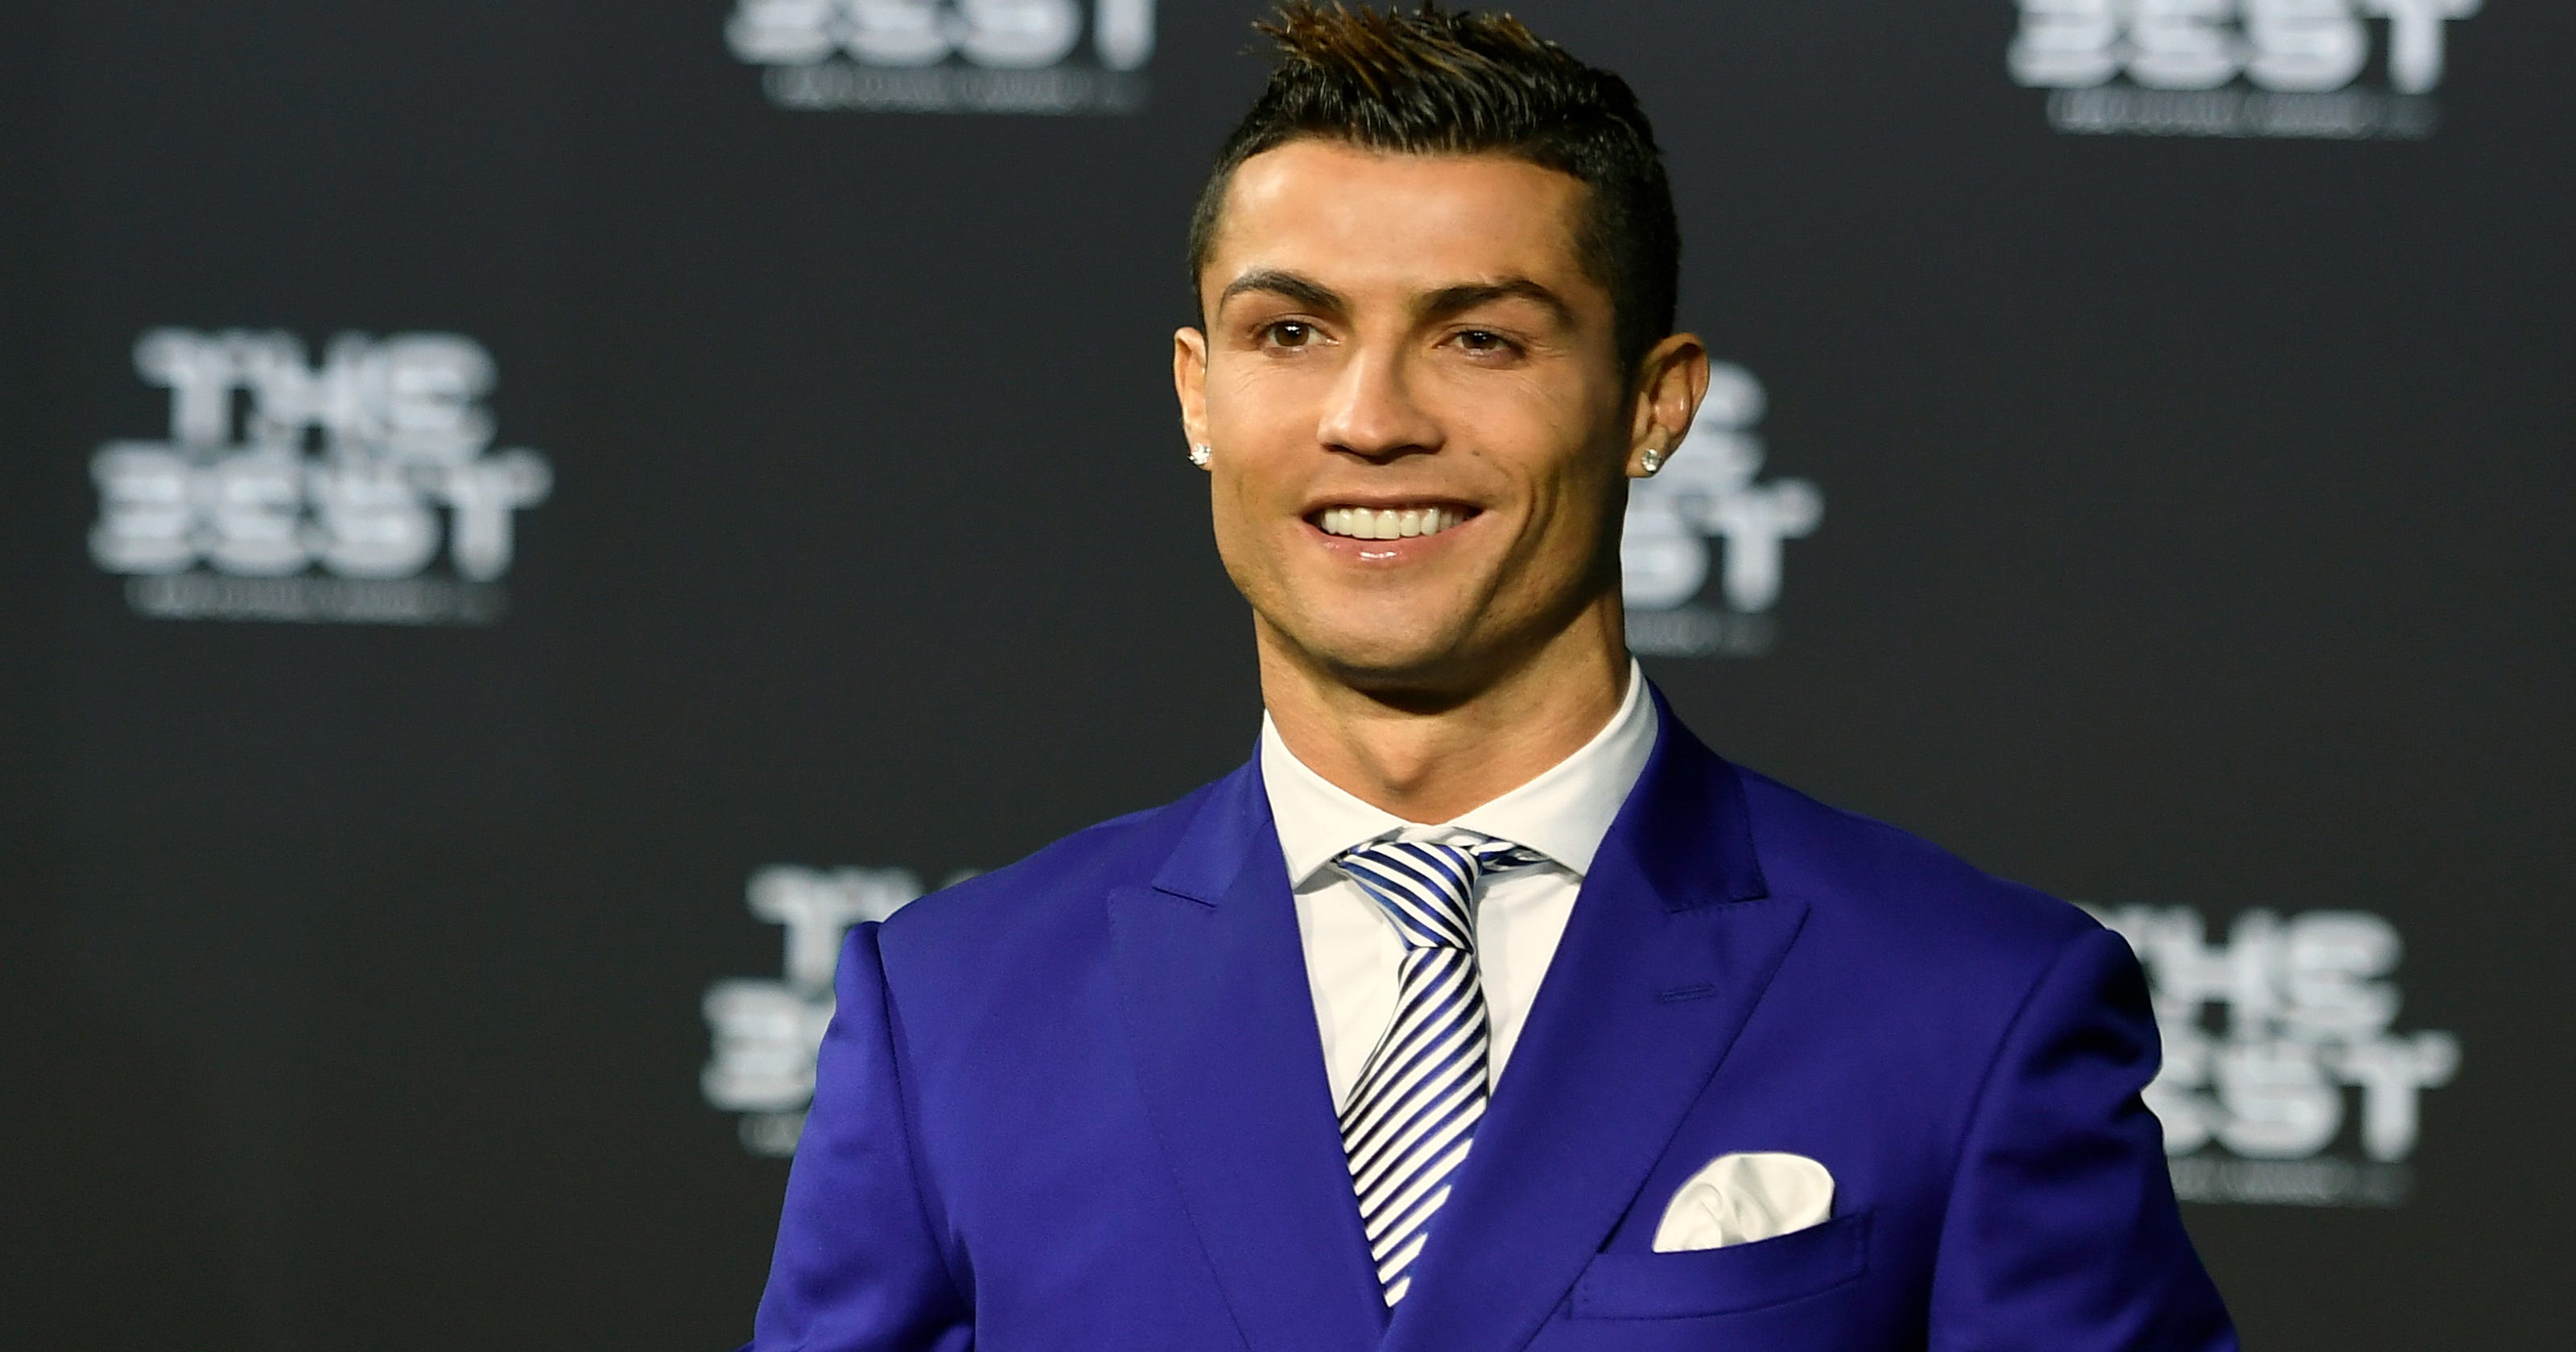 Cristiano Ronaldo wins FIFA best player award for 4th time